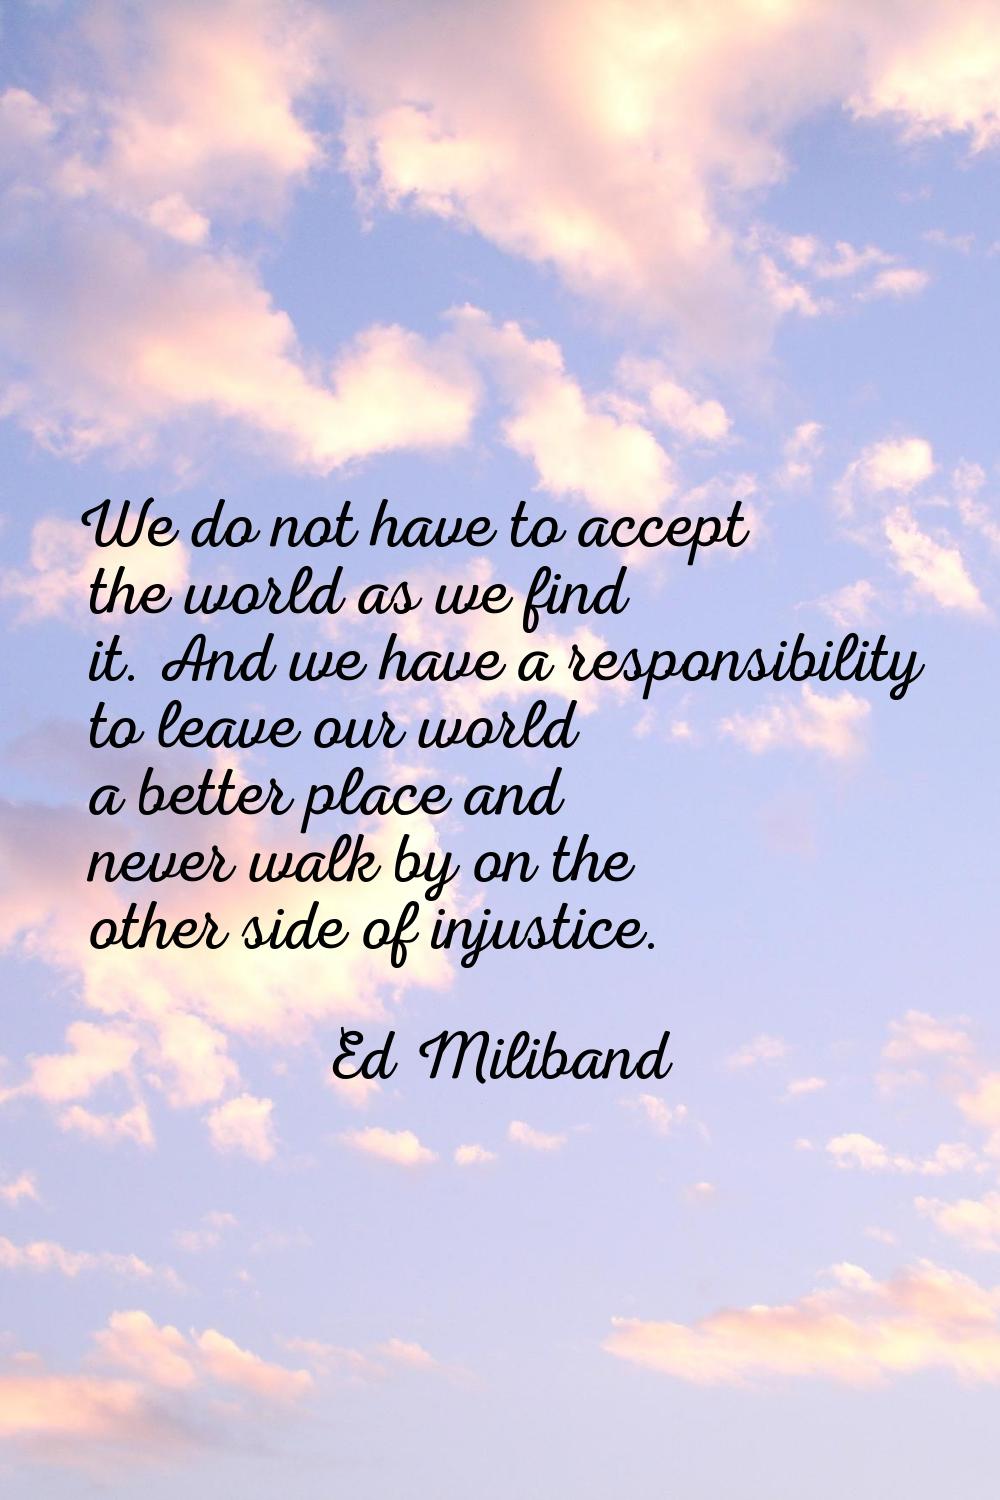 We do not have to accept the world as we find it. And we have a responsibility to leave our world a